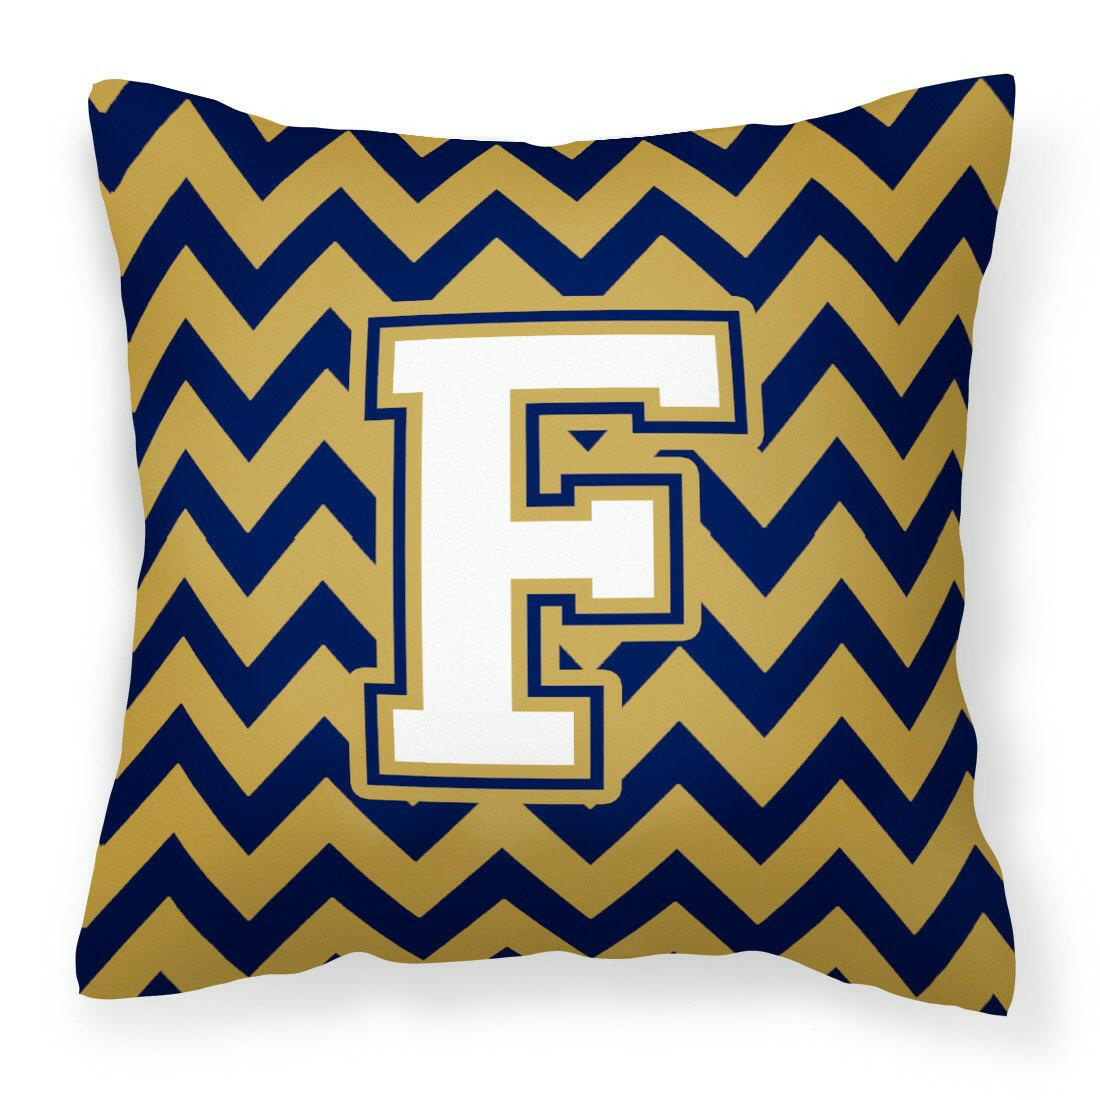 Letter F Chevron Navy Blue and Gold Fabric Decorative Pillow CJ1057-FPW1414 by Caroline's Treasures